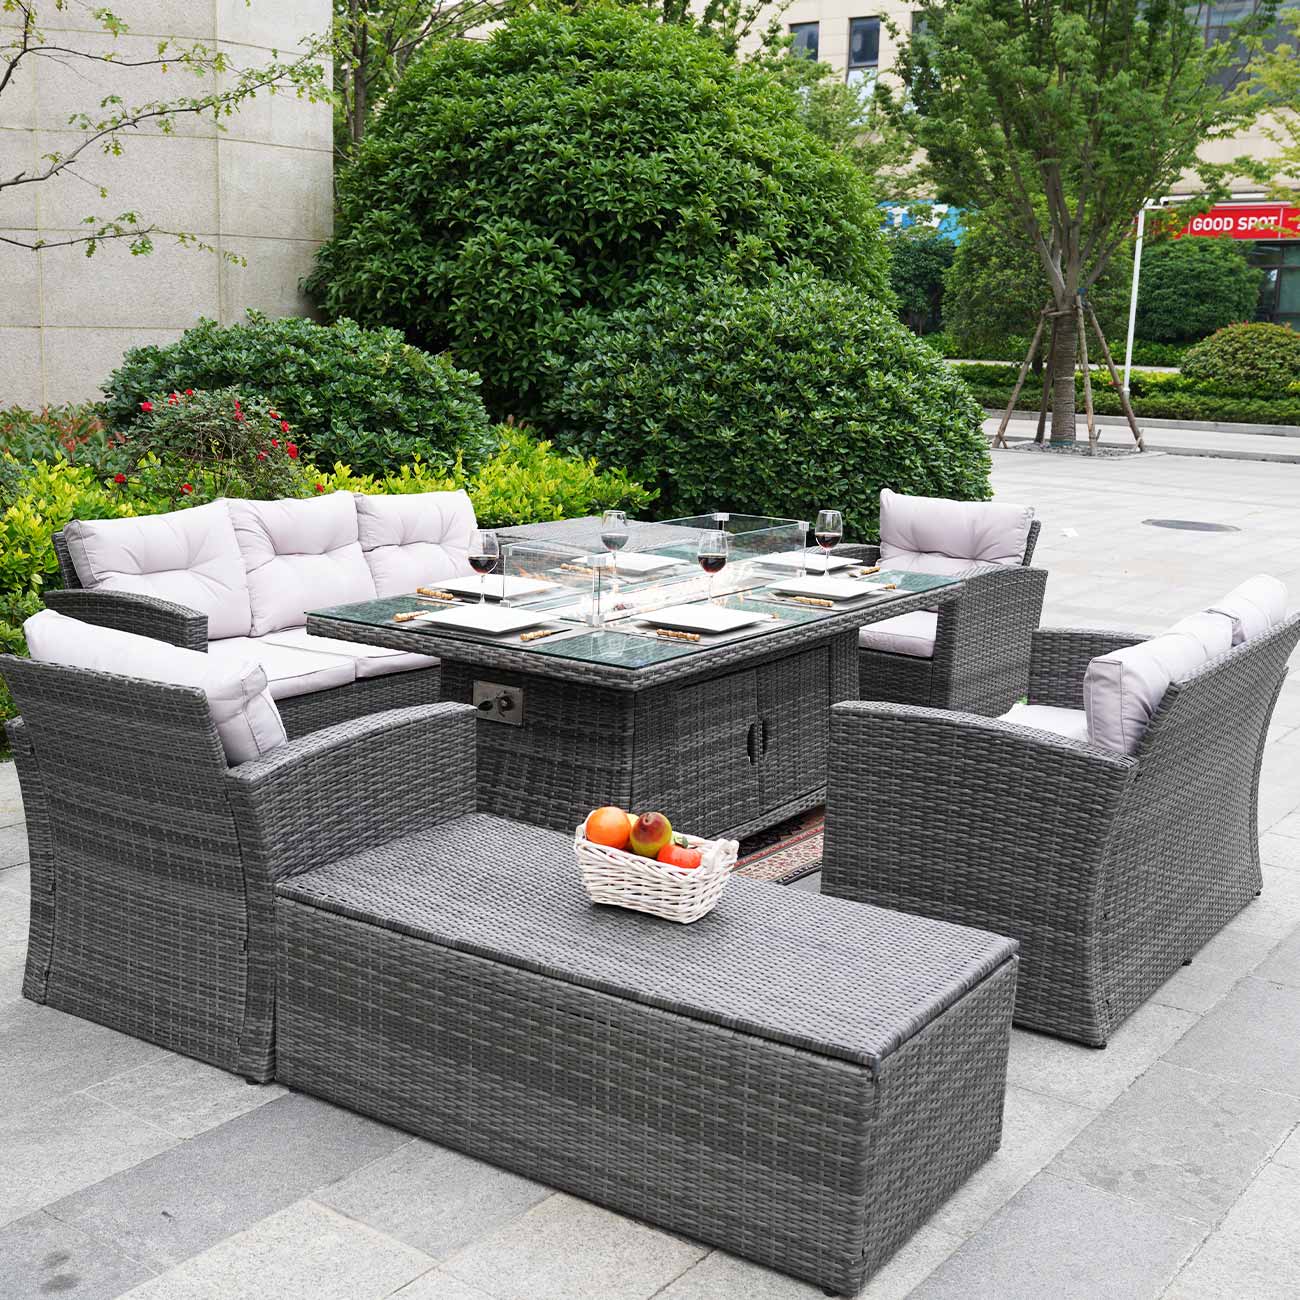 Abrihome Patio Furniture Sofa Set with Rectangular Fire Pit Glass Tabletop